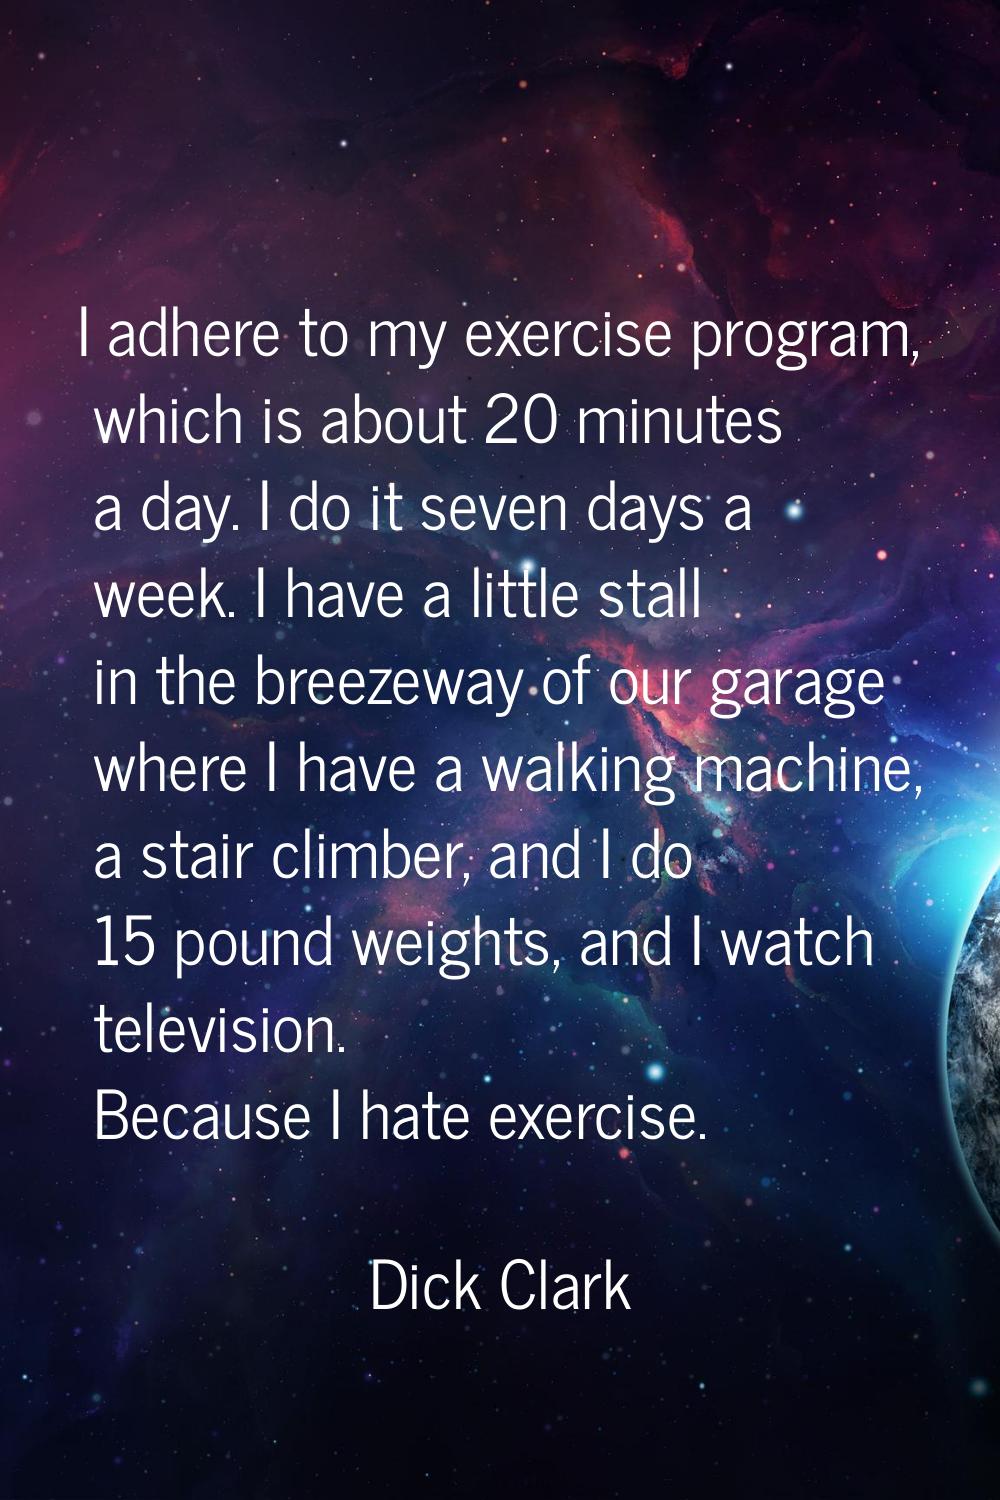 I adhere to my exercise program, which is about 20 minutes a day. I do it seven days a week. I have